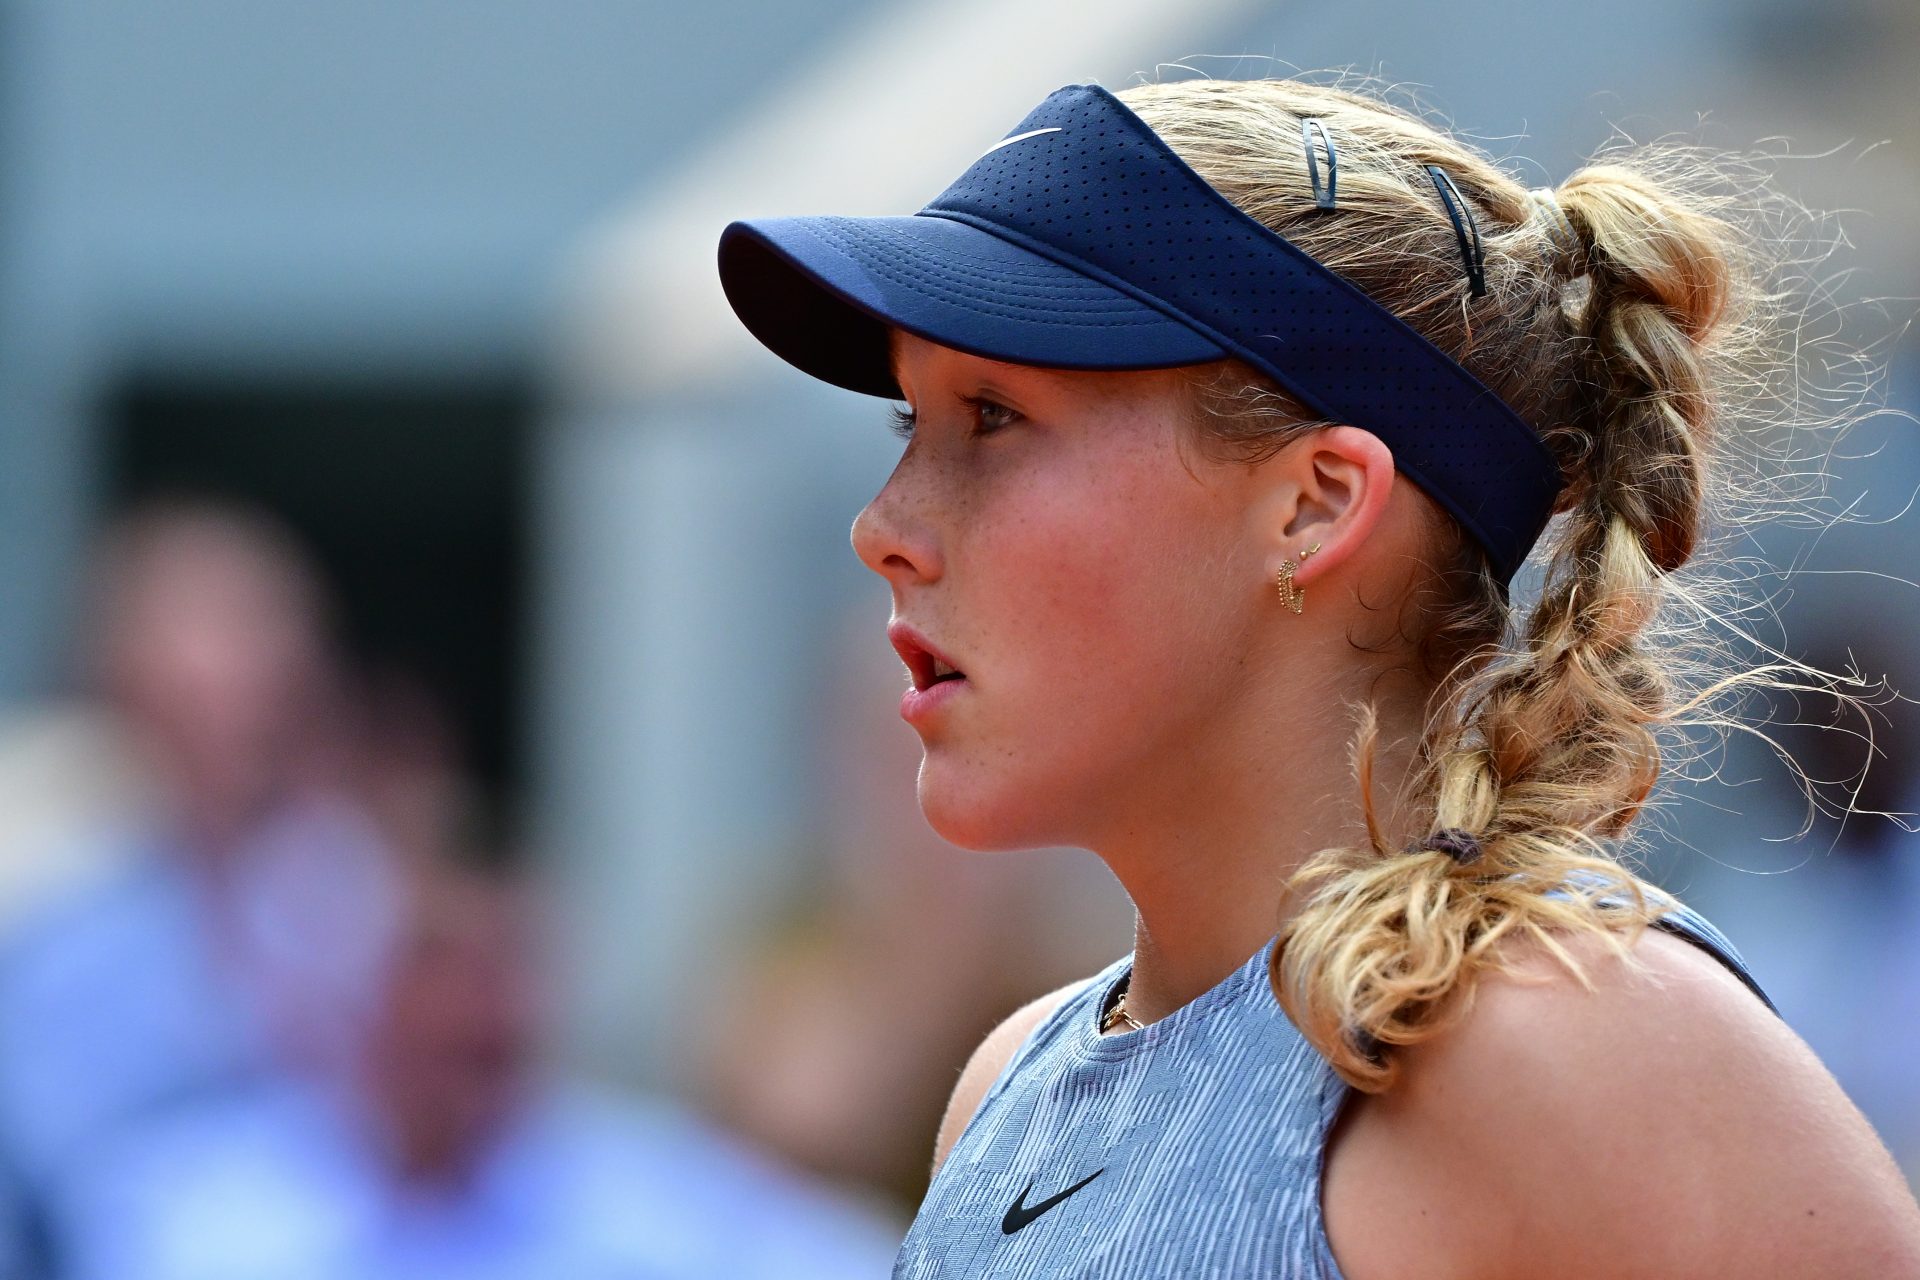 The next Hingis? Meet Mirra Andreeva, the 17yo star of the French Open